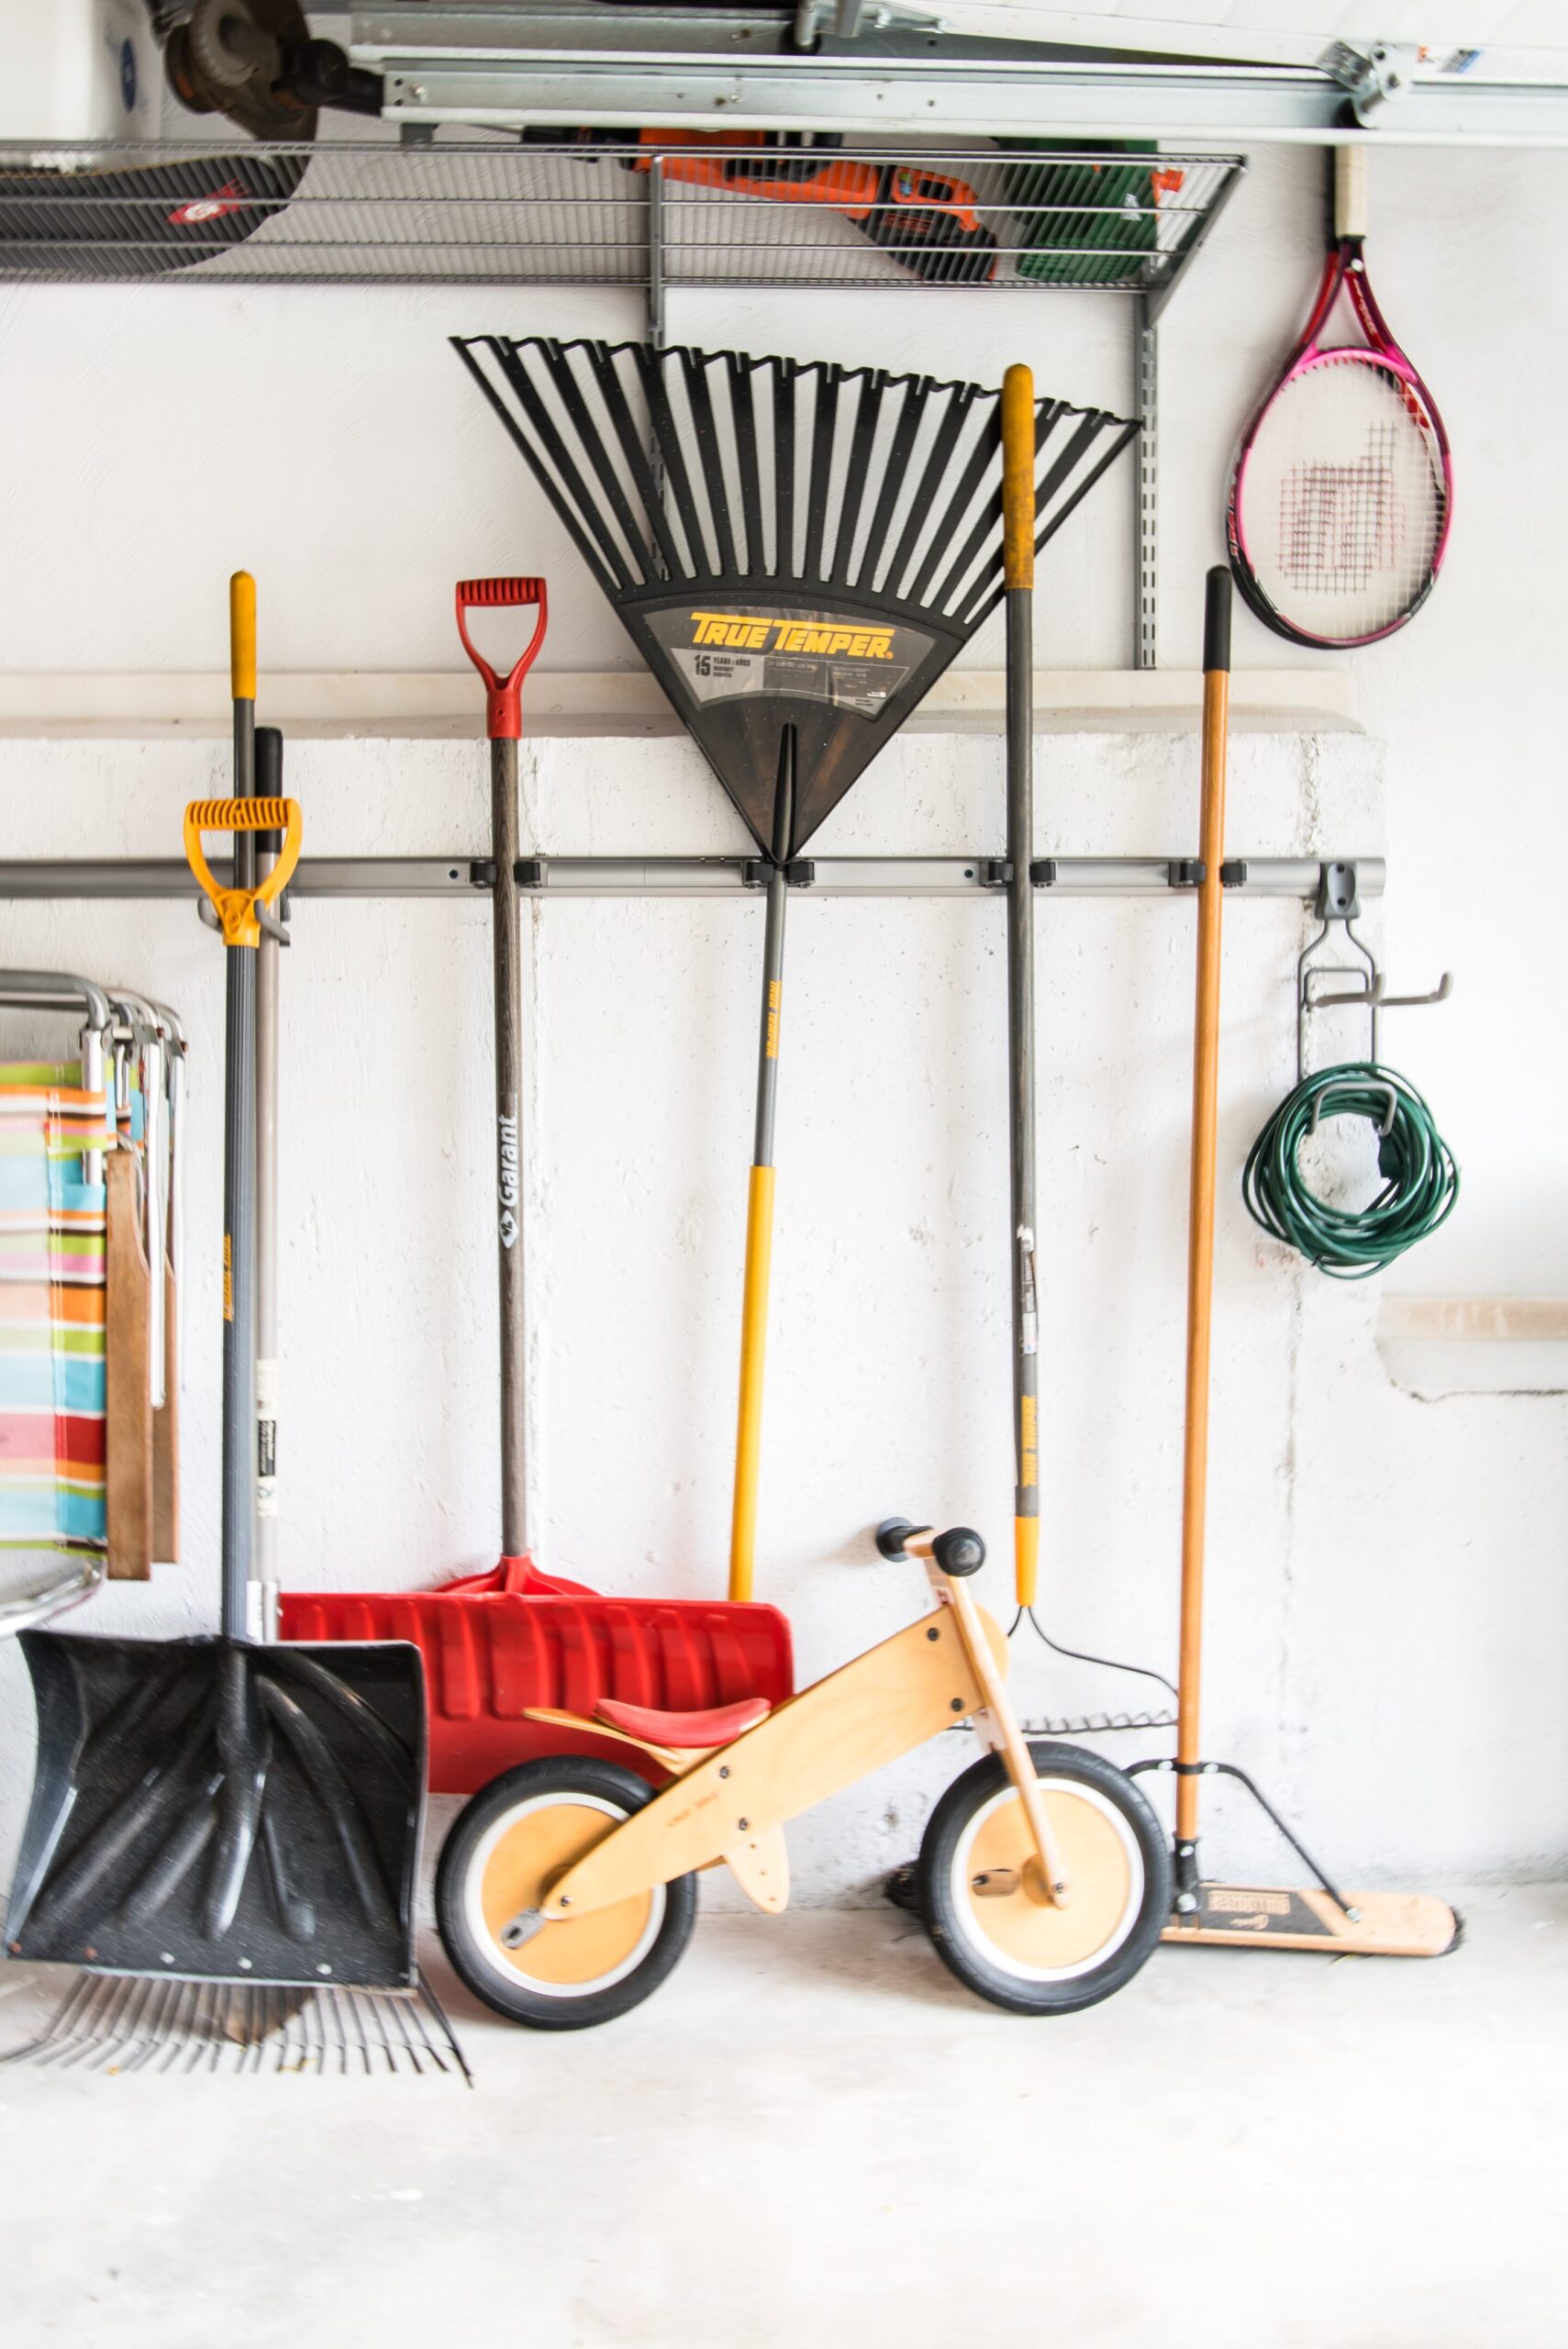 Rakes, Shovels, and other outdoor equipment attached to wall hooks on a garage wall.